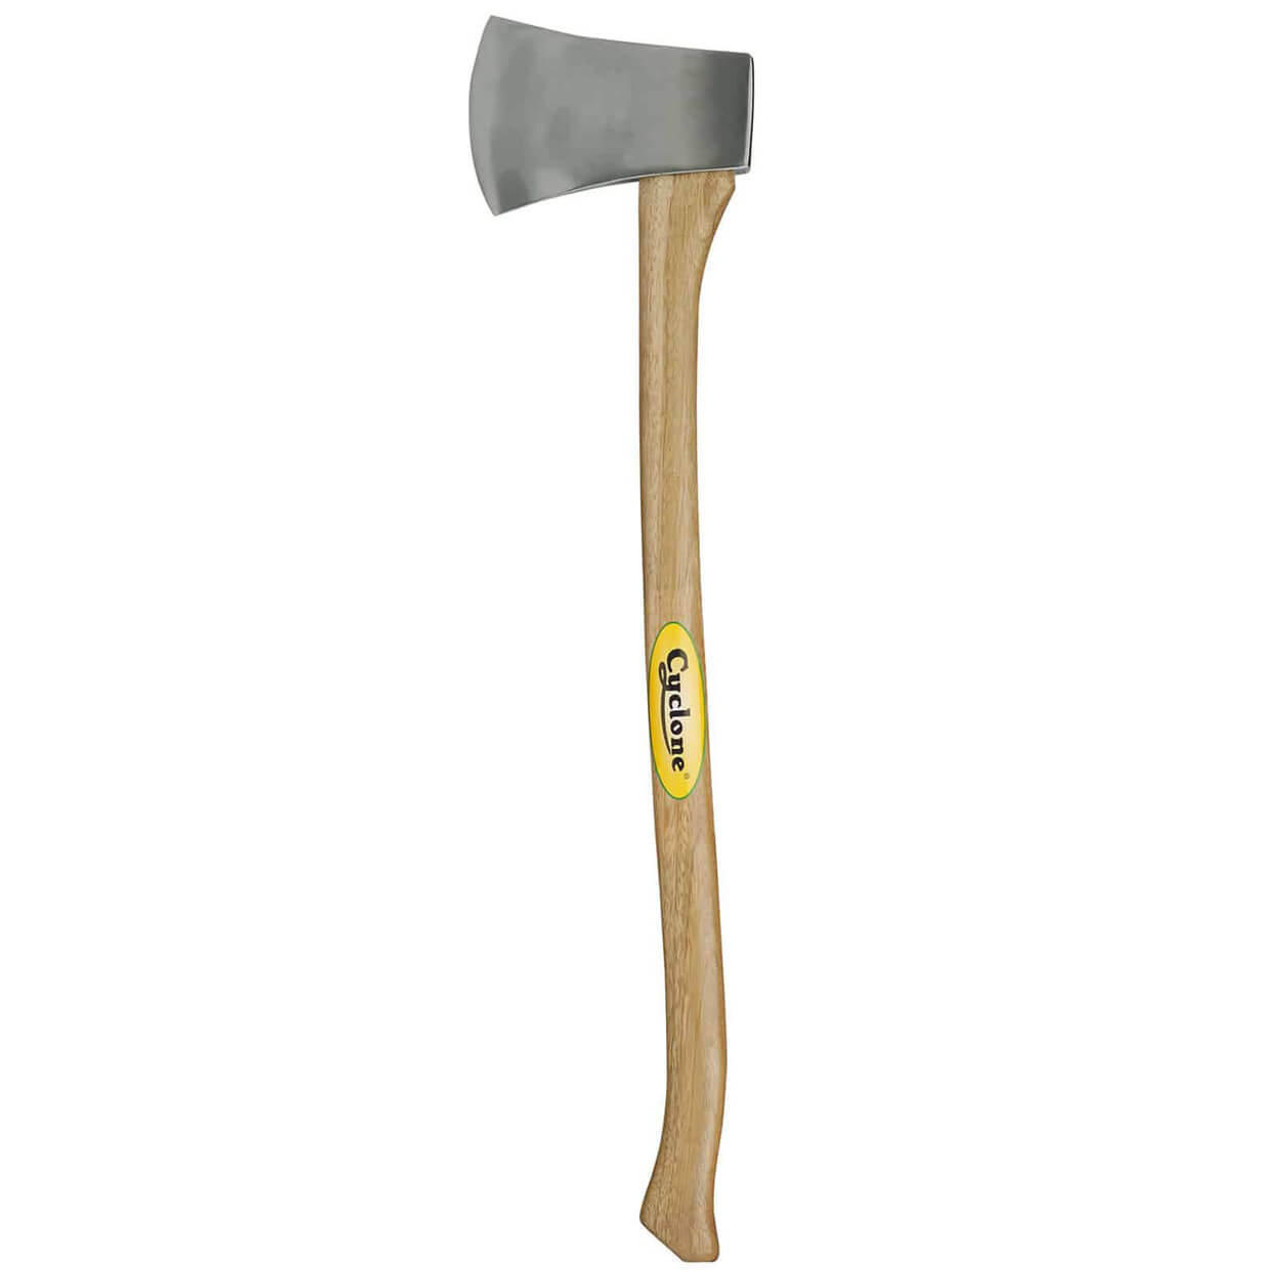  Cyclone 2kg Polished Axe 603457 